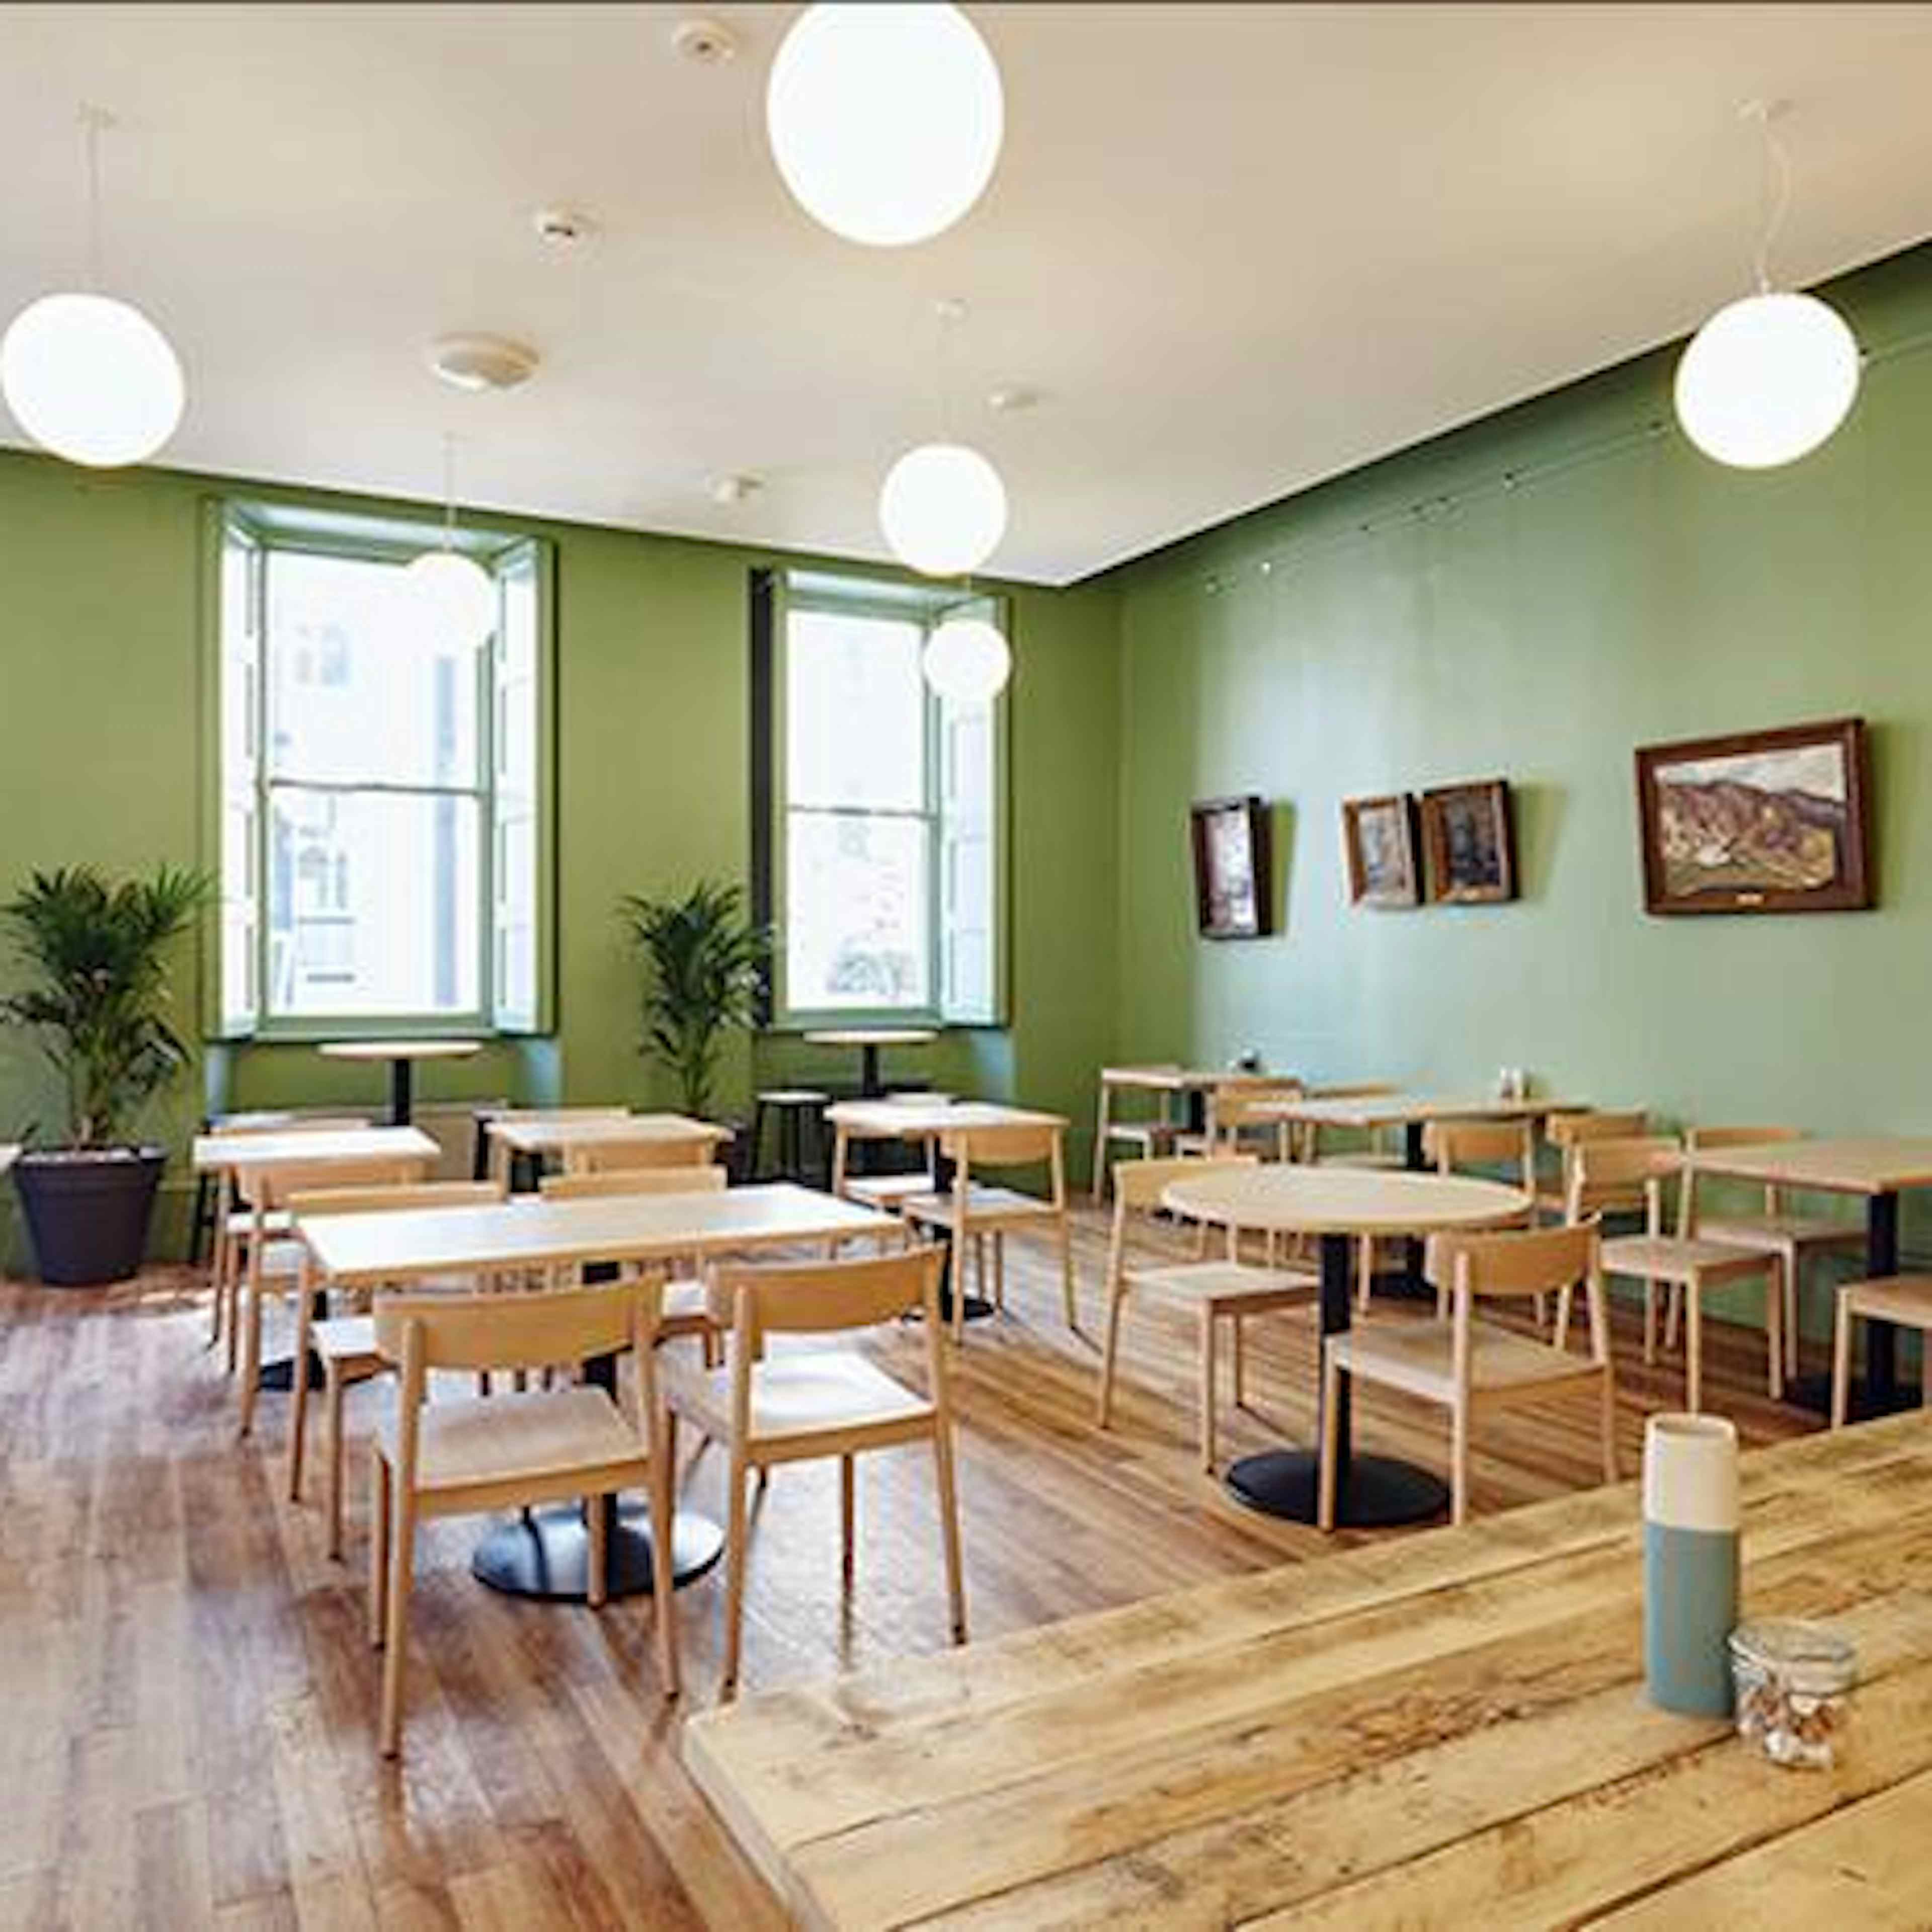 Manchester Art Gallery - Gallery Cafe and Drawing Room image 2